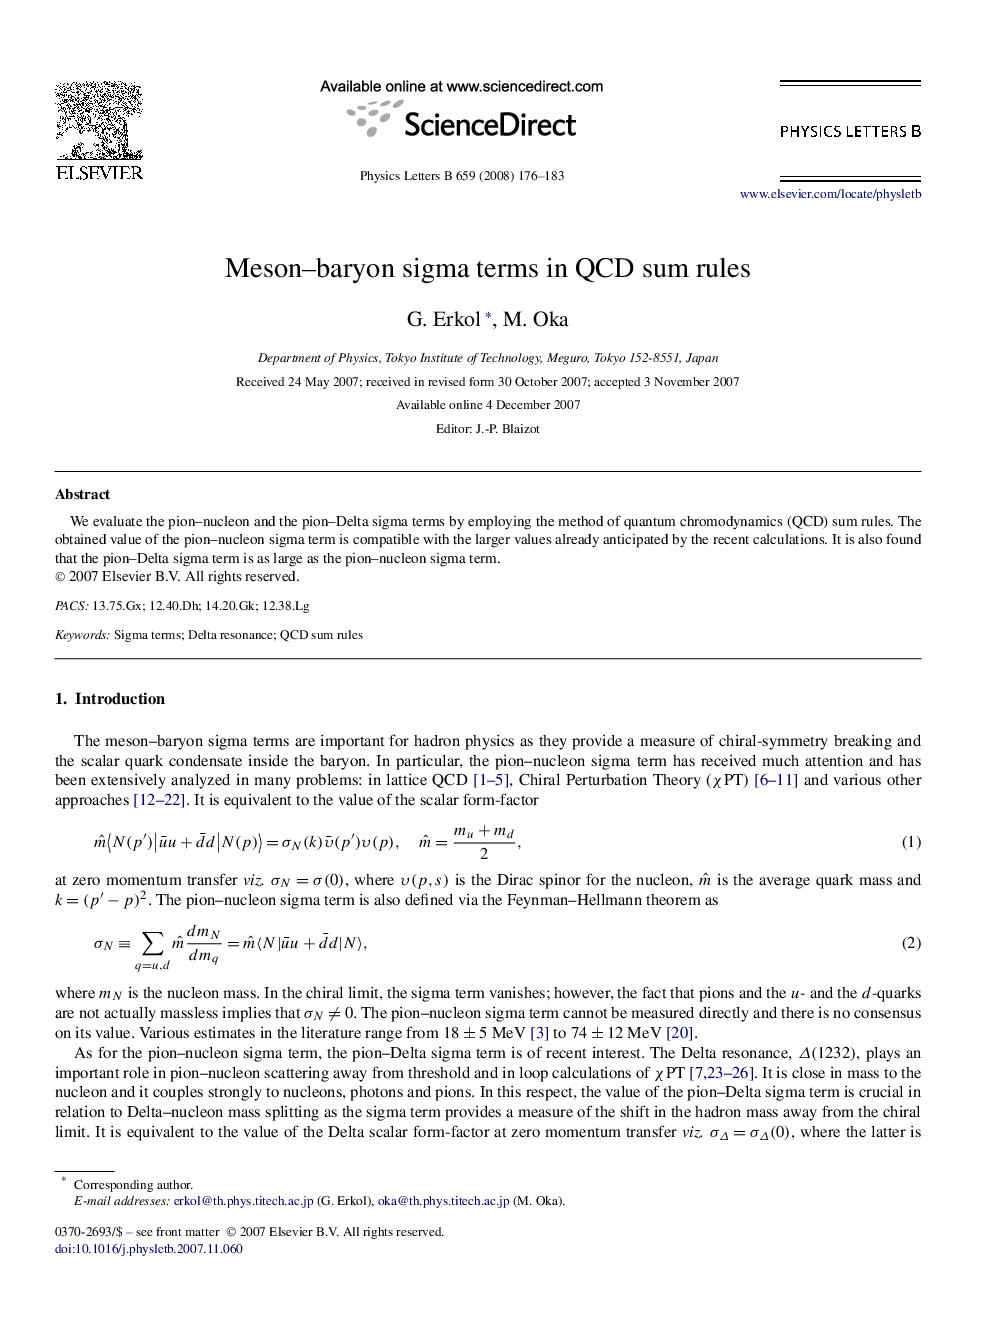 Meson-baryon sigma terms in QCD sum rules